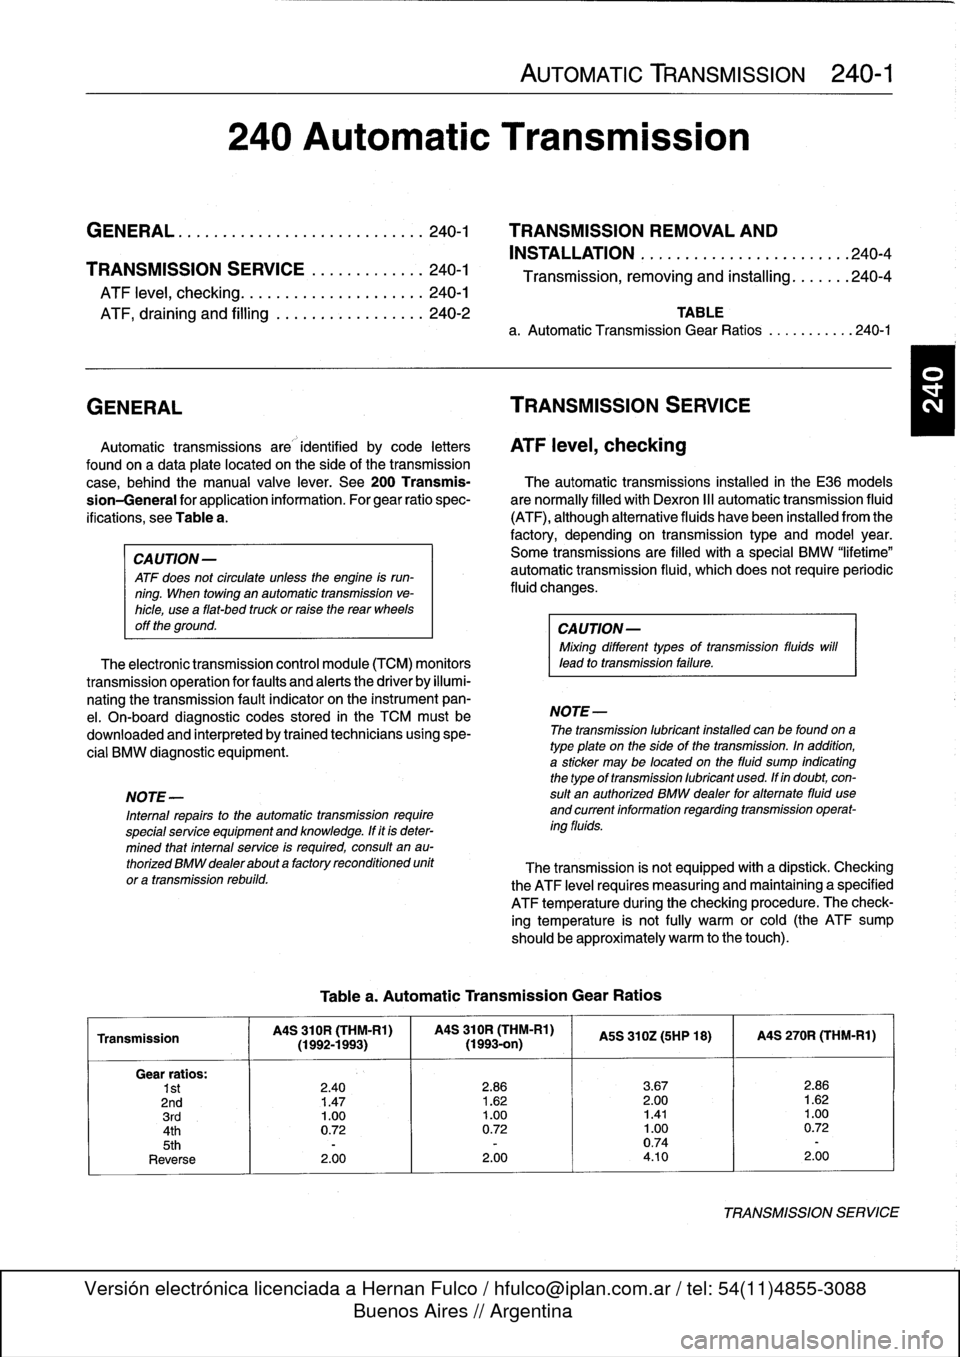 BMW 318i 1997 E36 Workshop Manual 
AUTOMATIC
TRANSMISSION

	

240-1

240
Automatic
Transmission

GENERAL
.....
.
.
.
.
.
.
.
.
.
.
.
.
.
.........
.
240-1

	

TRANSMISSION
REMOVAL
AND

INSTALLATION
..................
.
.
.
.
.240-4
TR